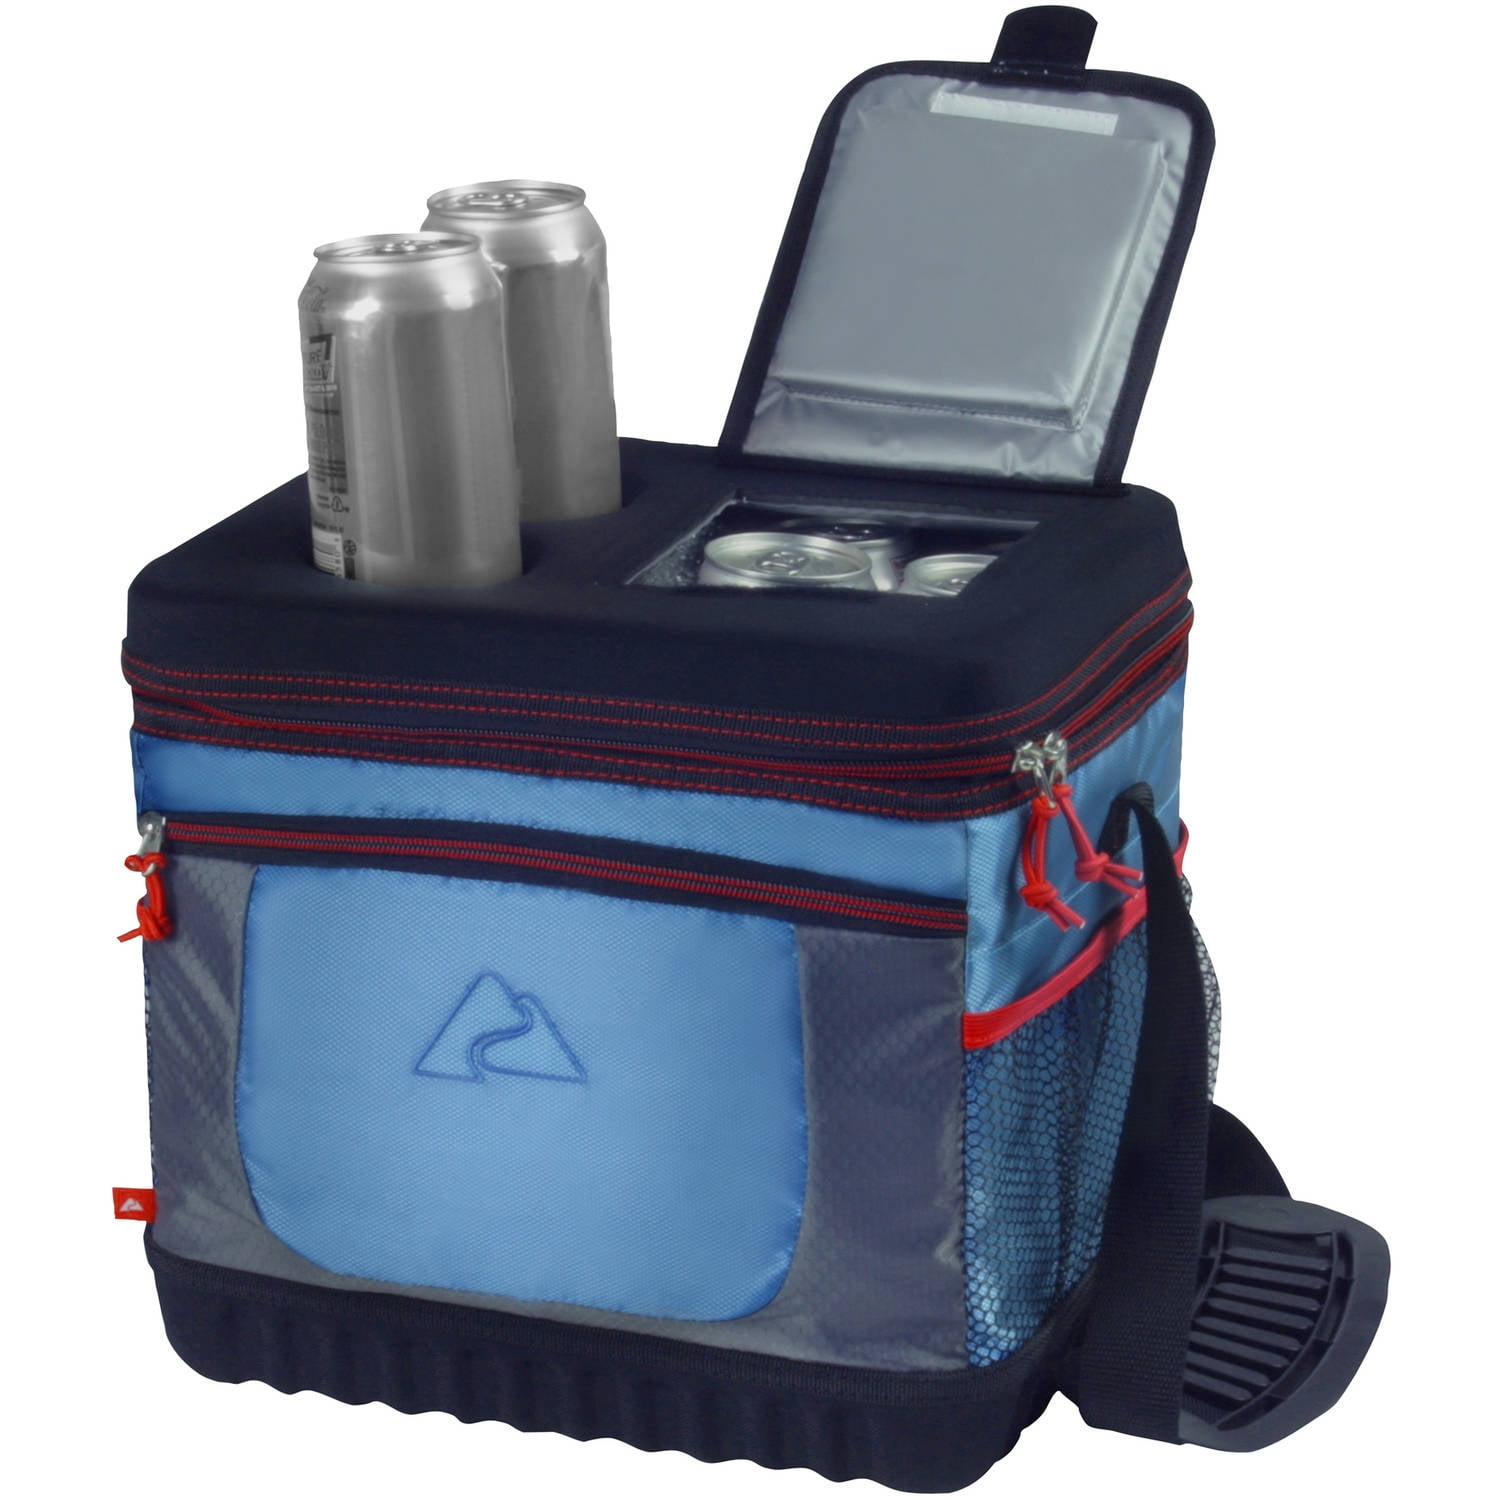 Ozark Trail 18-Can Extreme Cooler, Blue 